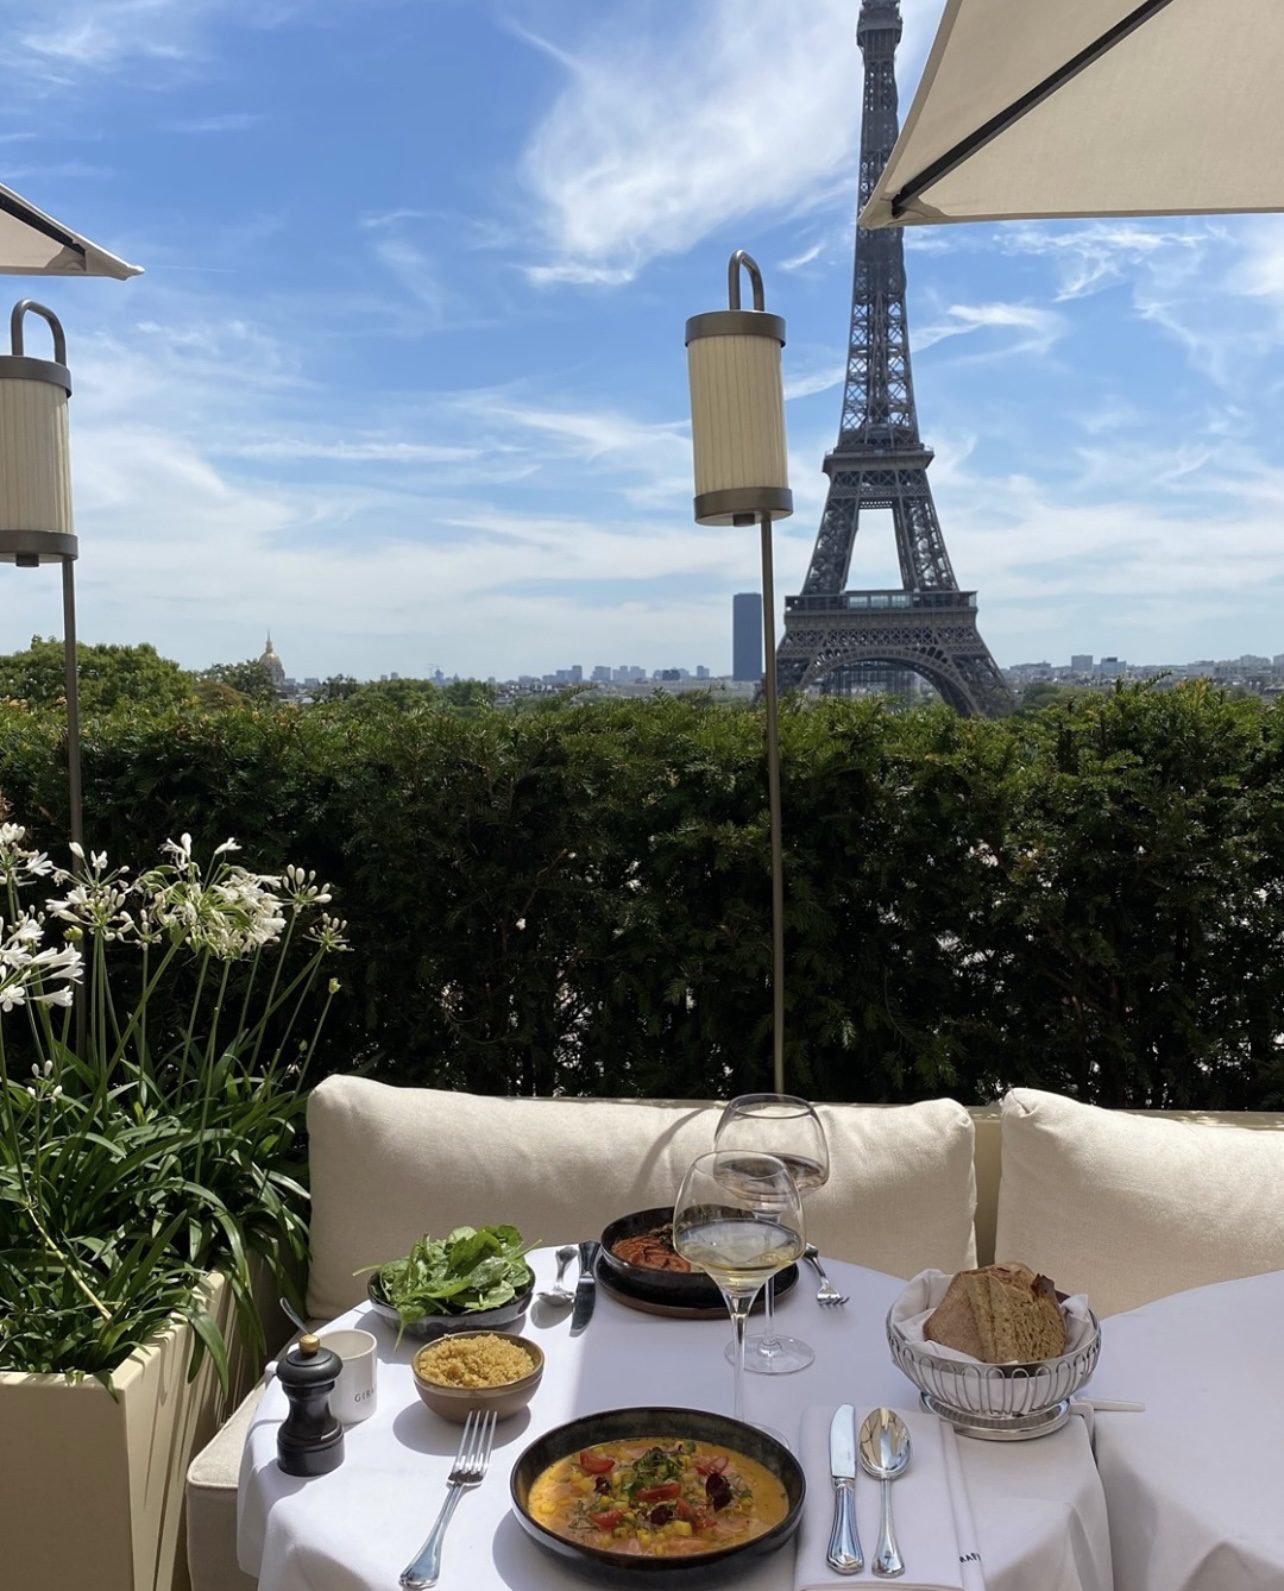 Girafe Paris Restaurant: Is it Worth the Hype in 2022? (Review)